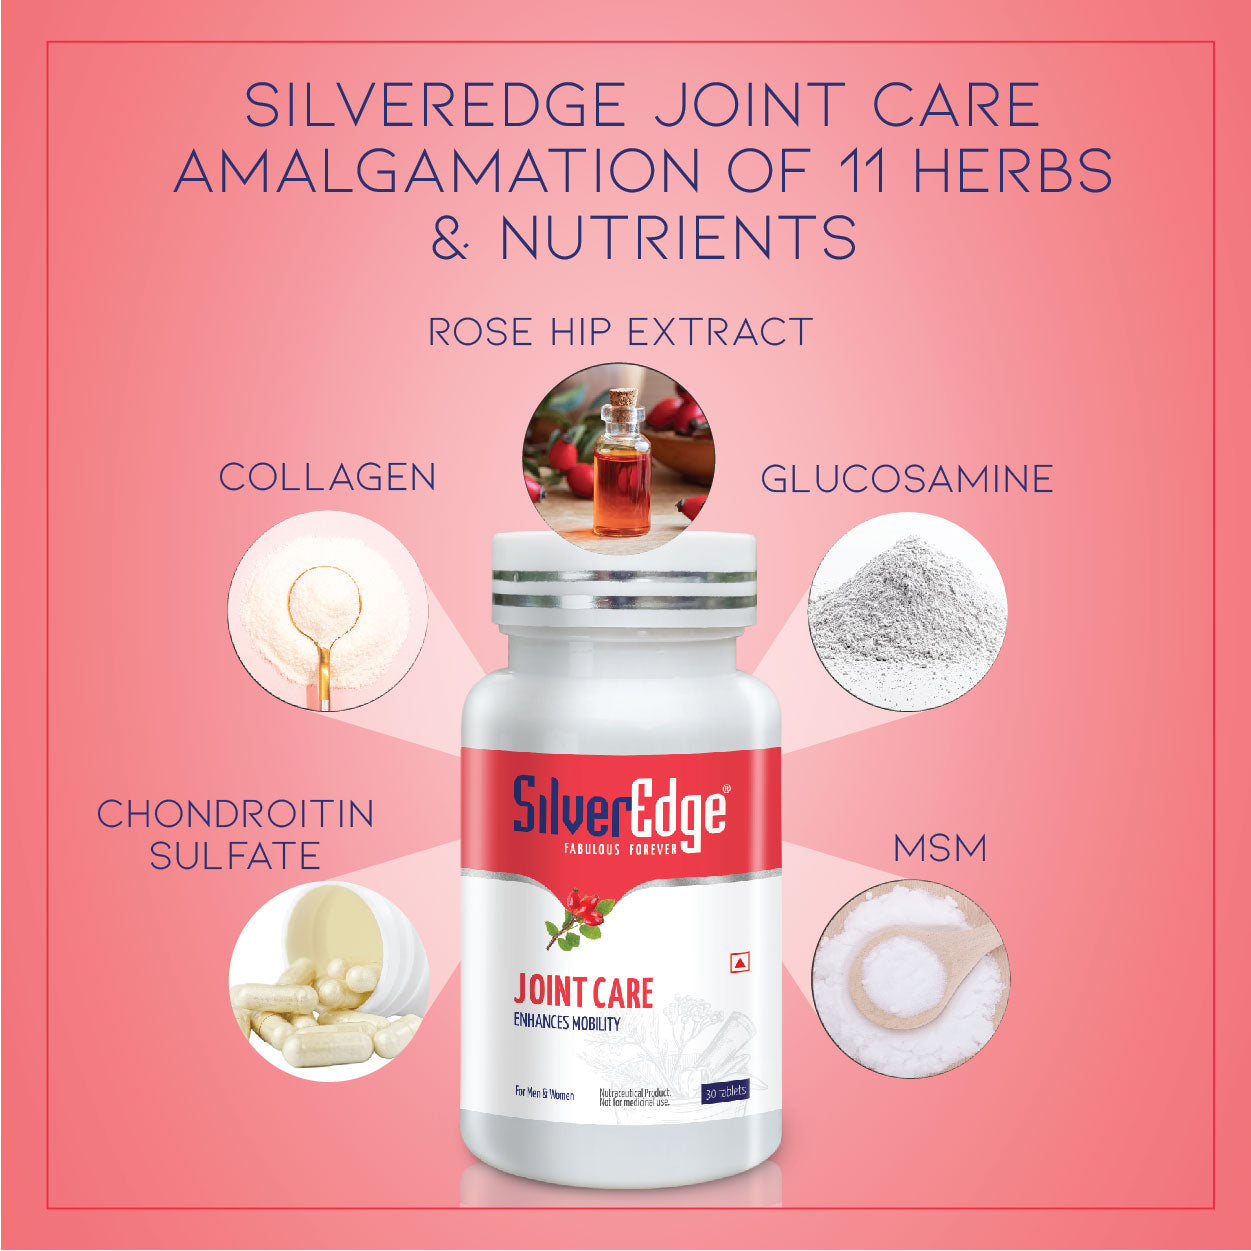 buy joint care tablet in india, Joint Care tablet in india, buy joint care tablet, best joint care tablet, joint care tablet, best tablet for joint pain, SilverEdge, best tablet for joints, best for bone joint, 